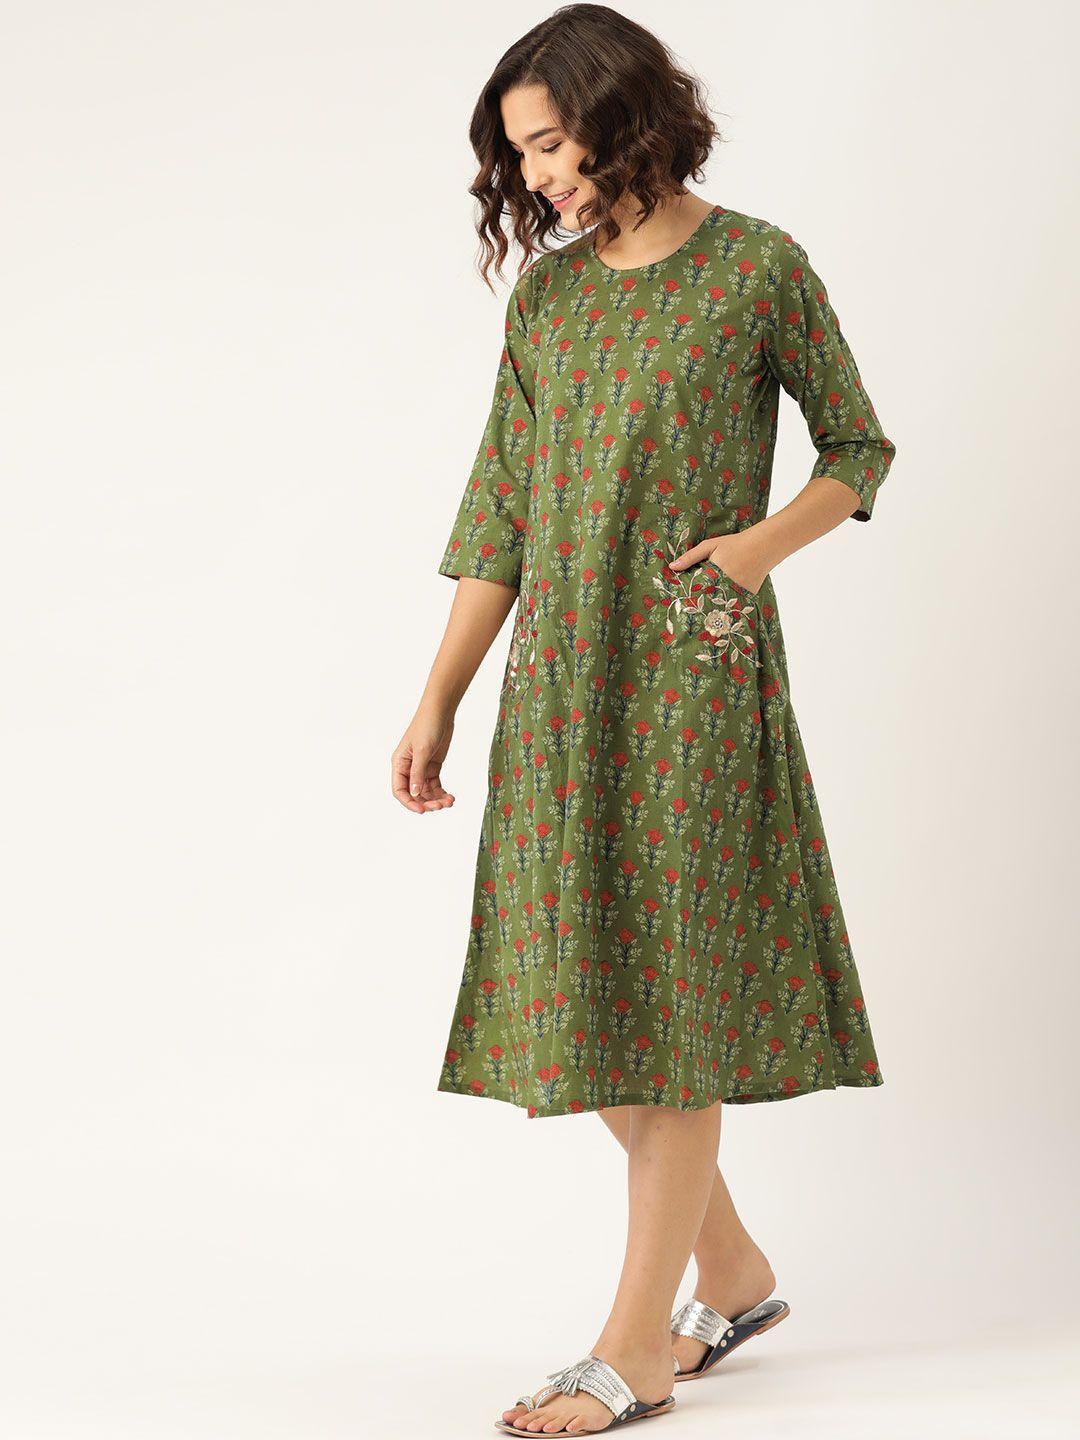 shae by sassafras olive green & coral red pure cotton printed embroidered a-line dress